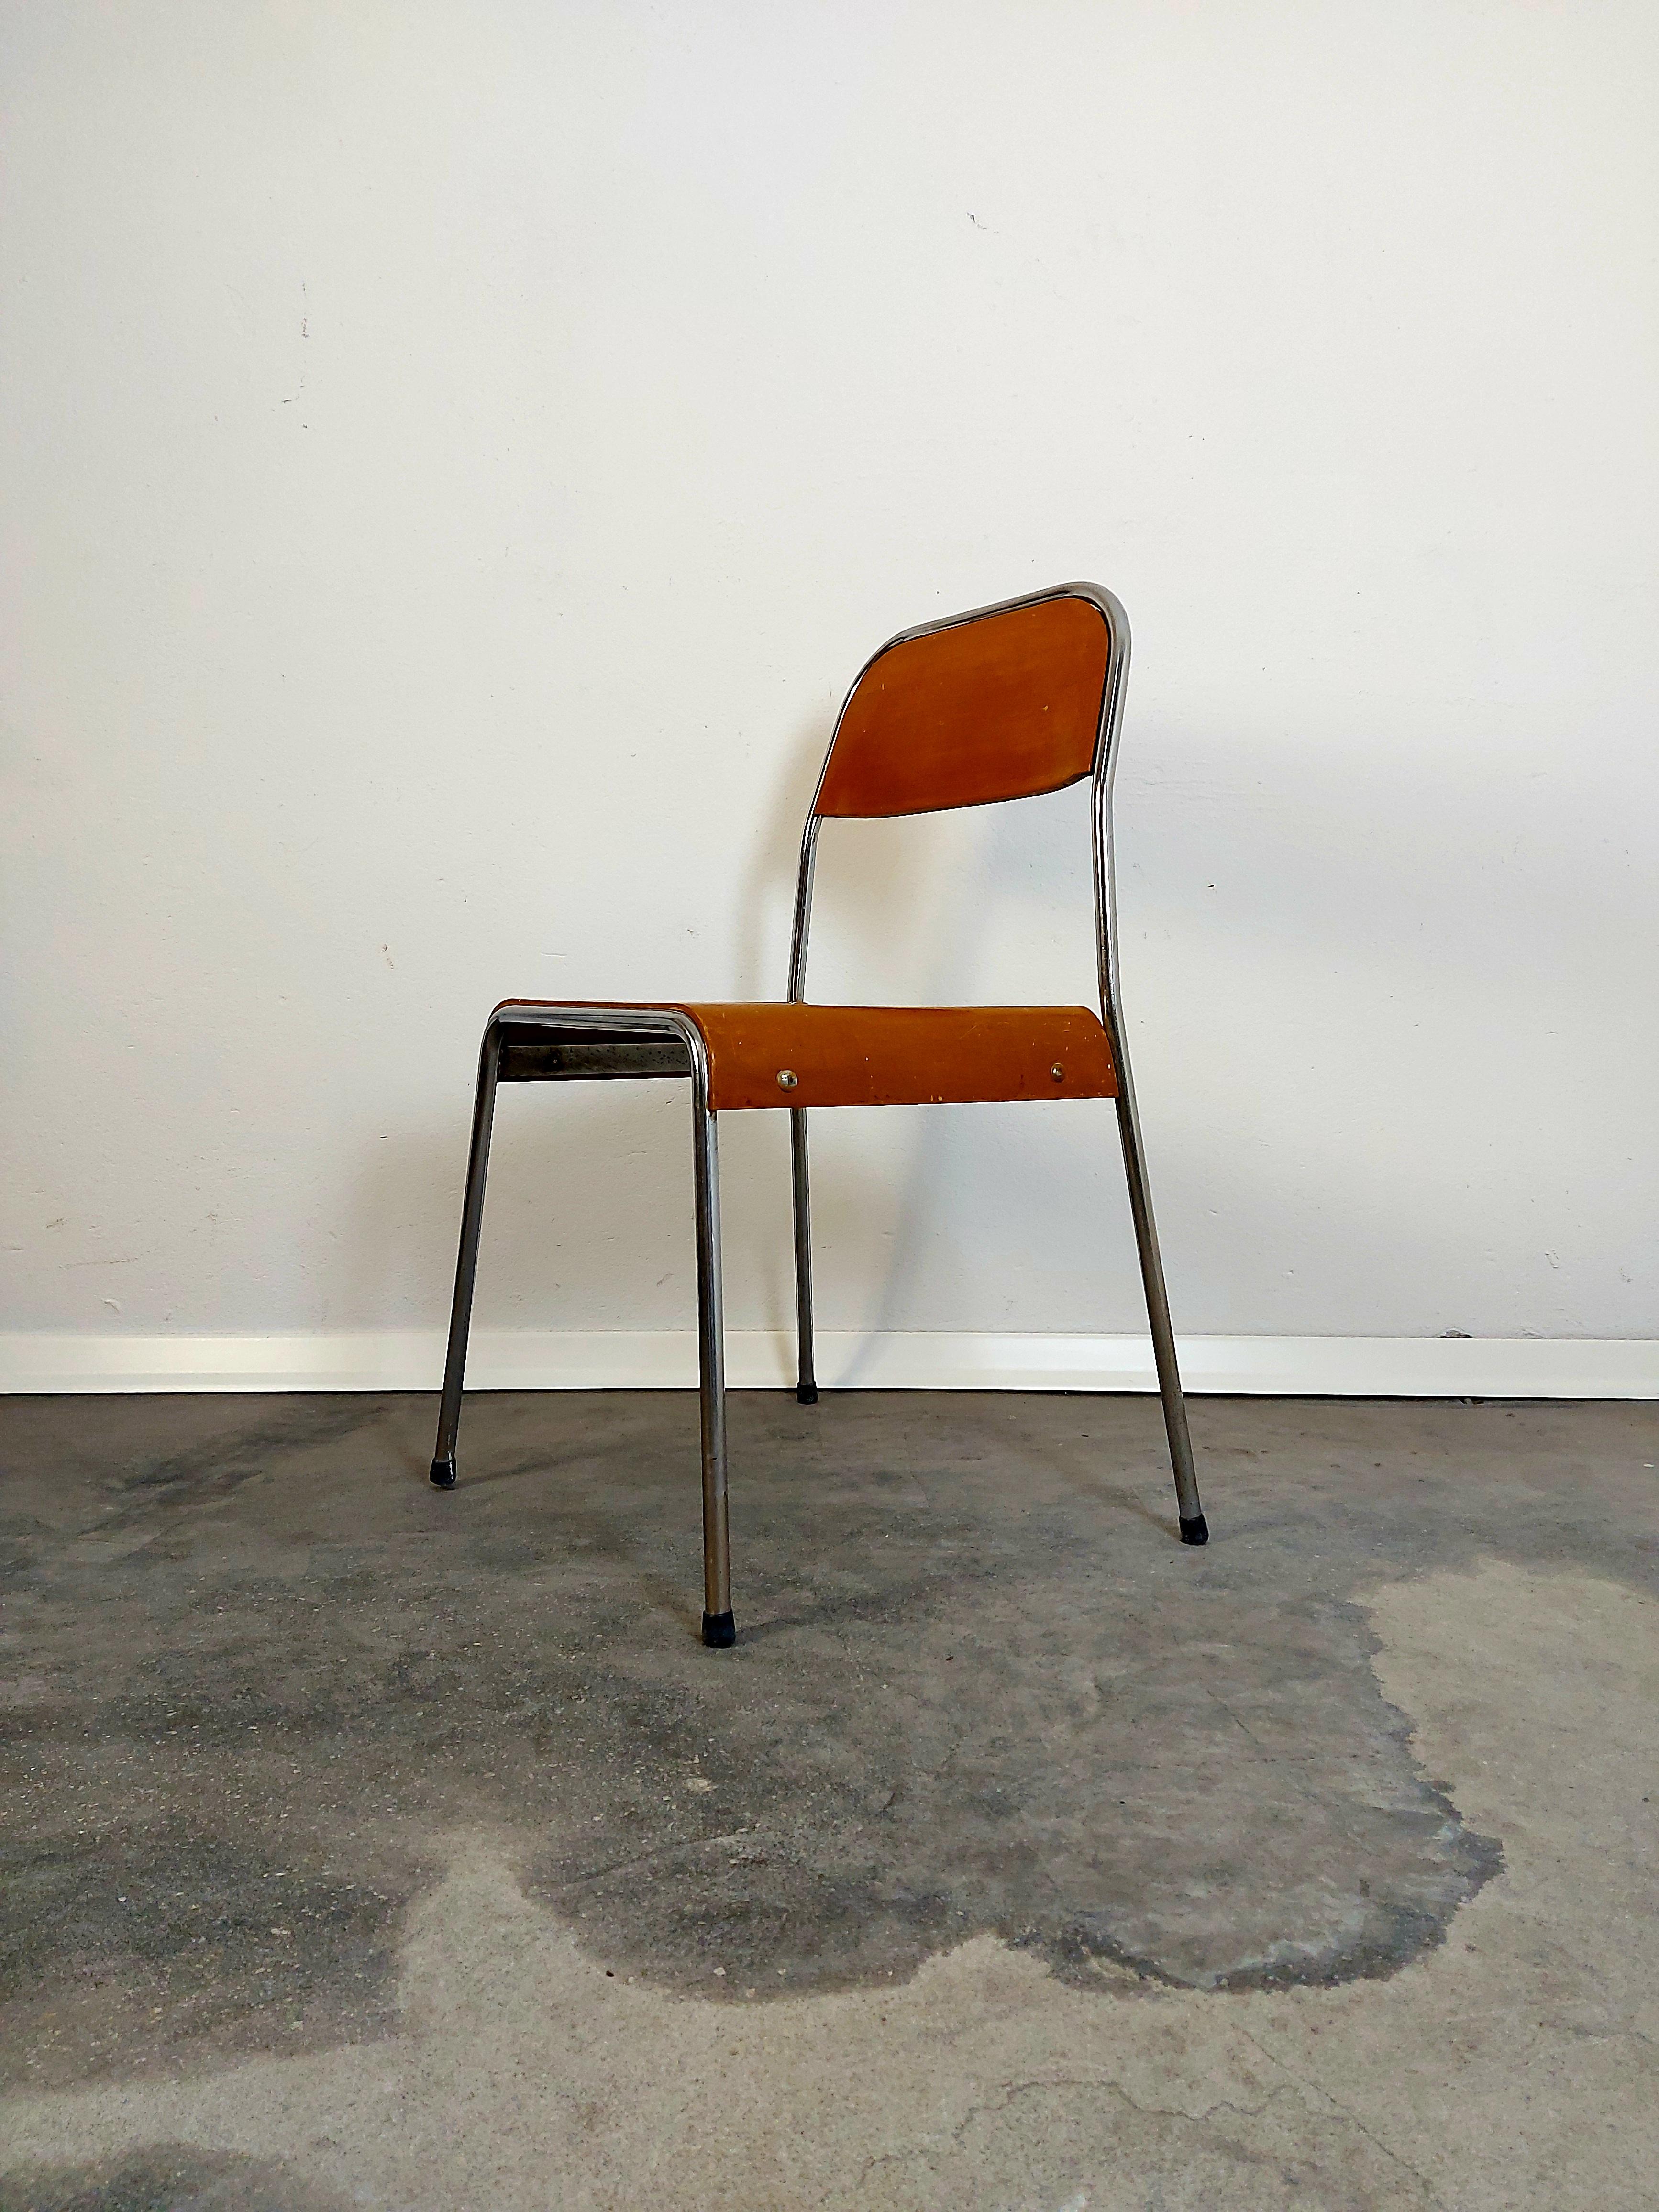 Mid-Century Modern Chair, Stackable, 1970s, 1 of 4 For Sale